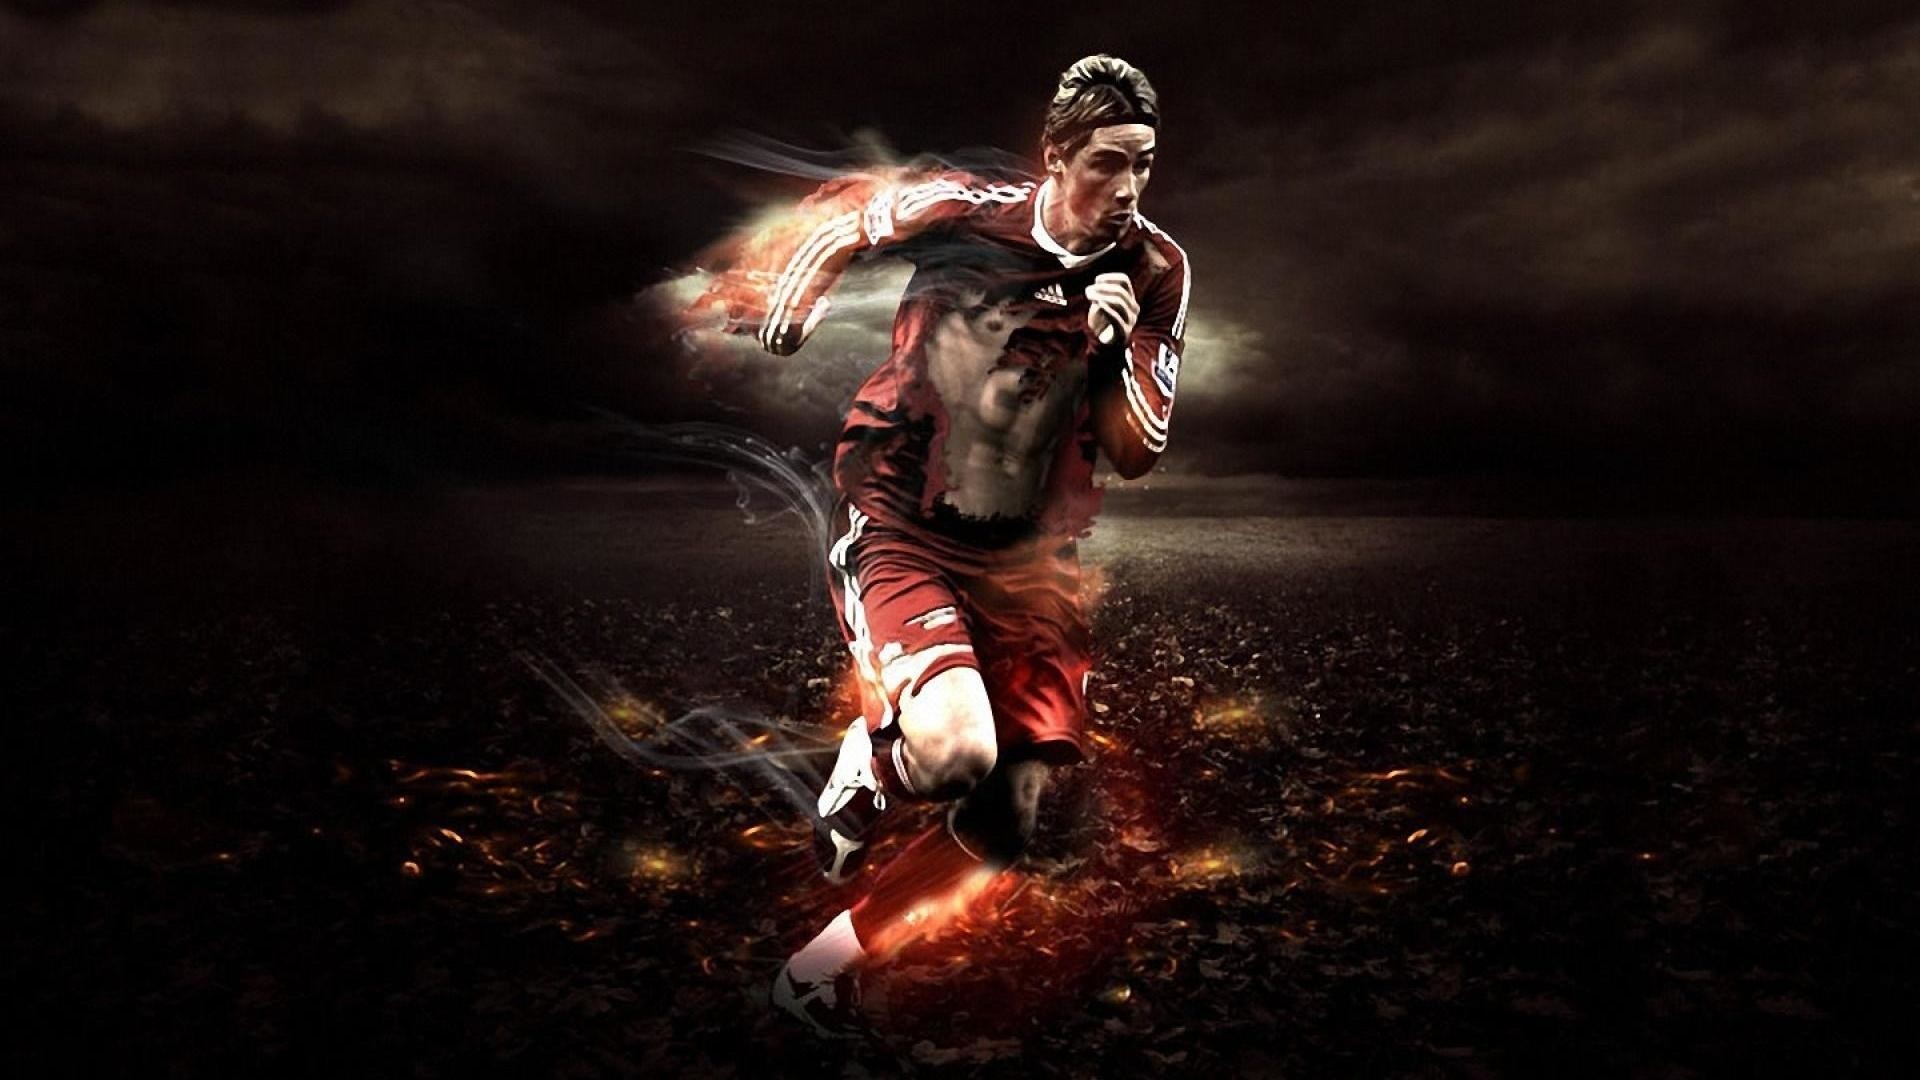 1920x1080  Cool Soccer Backgrounds Download Free | HD Wallpapers | Pinterest  | Soccer pictures, 3d wallpaper and Wallpaper